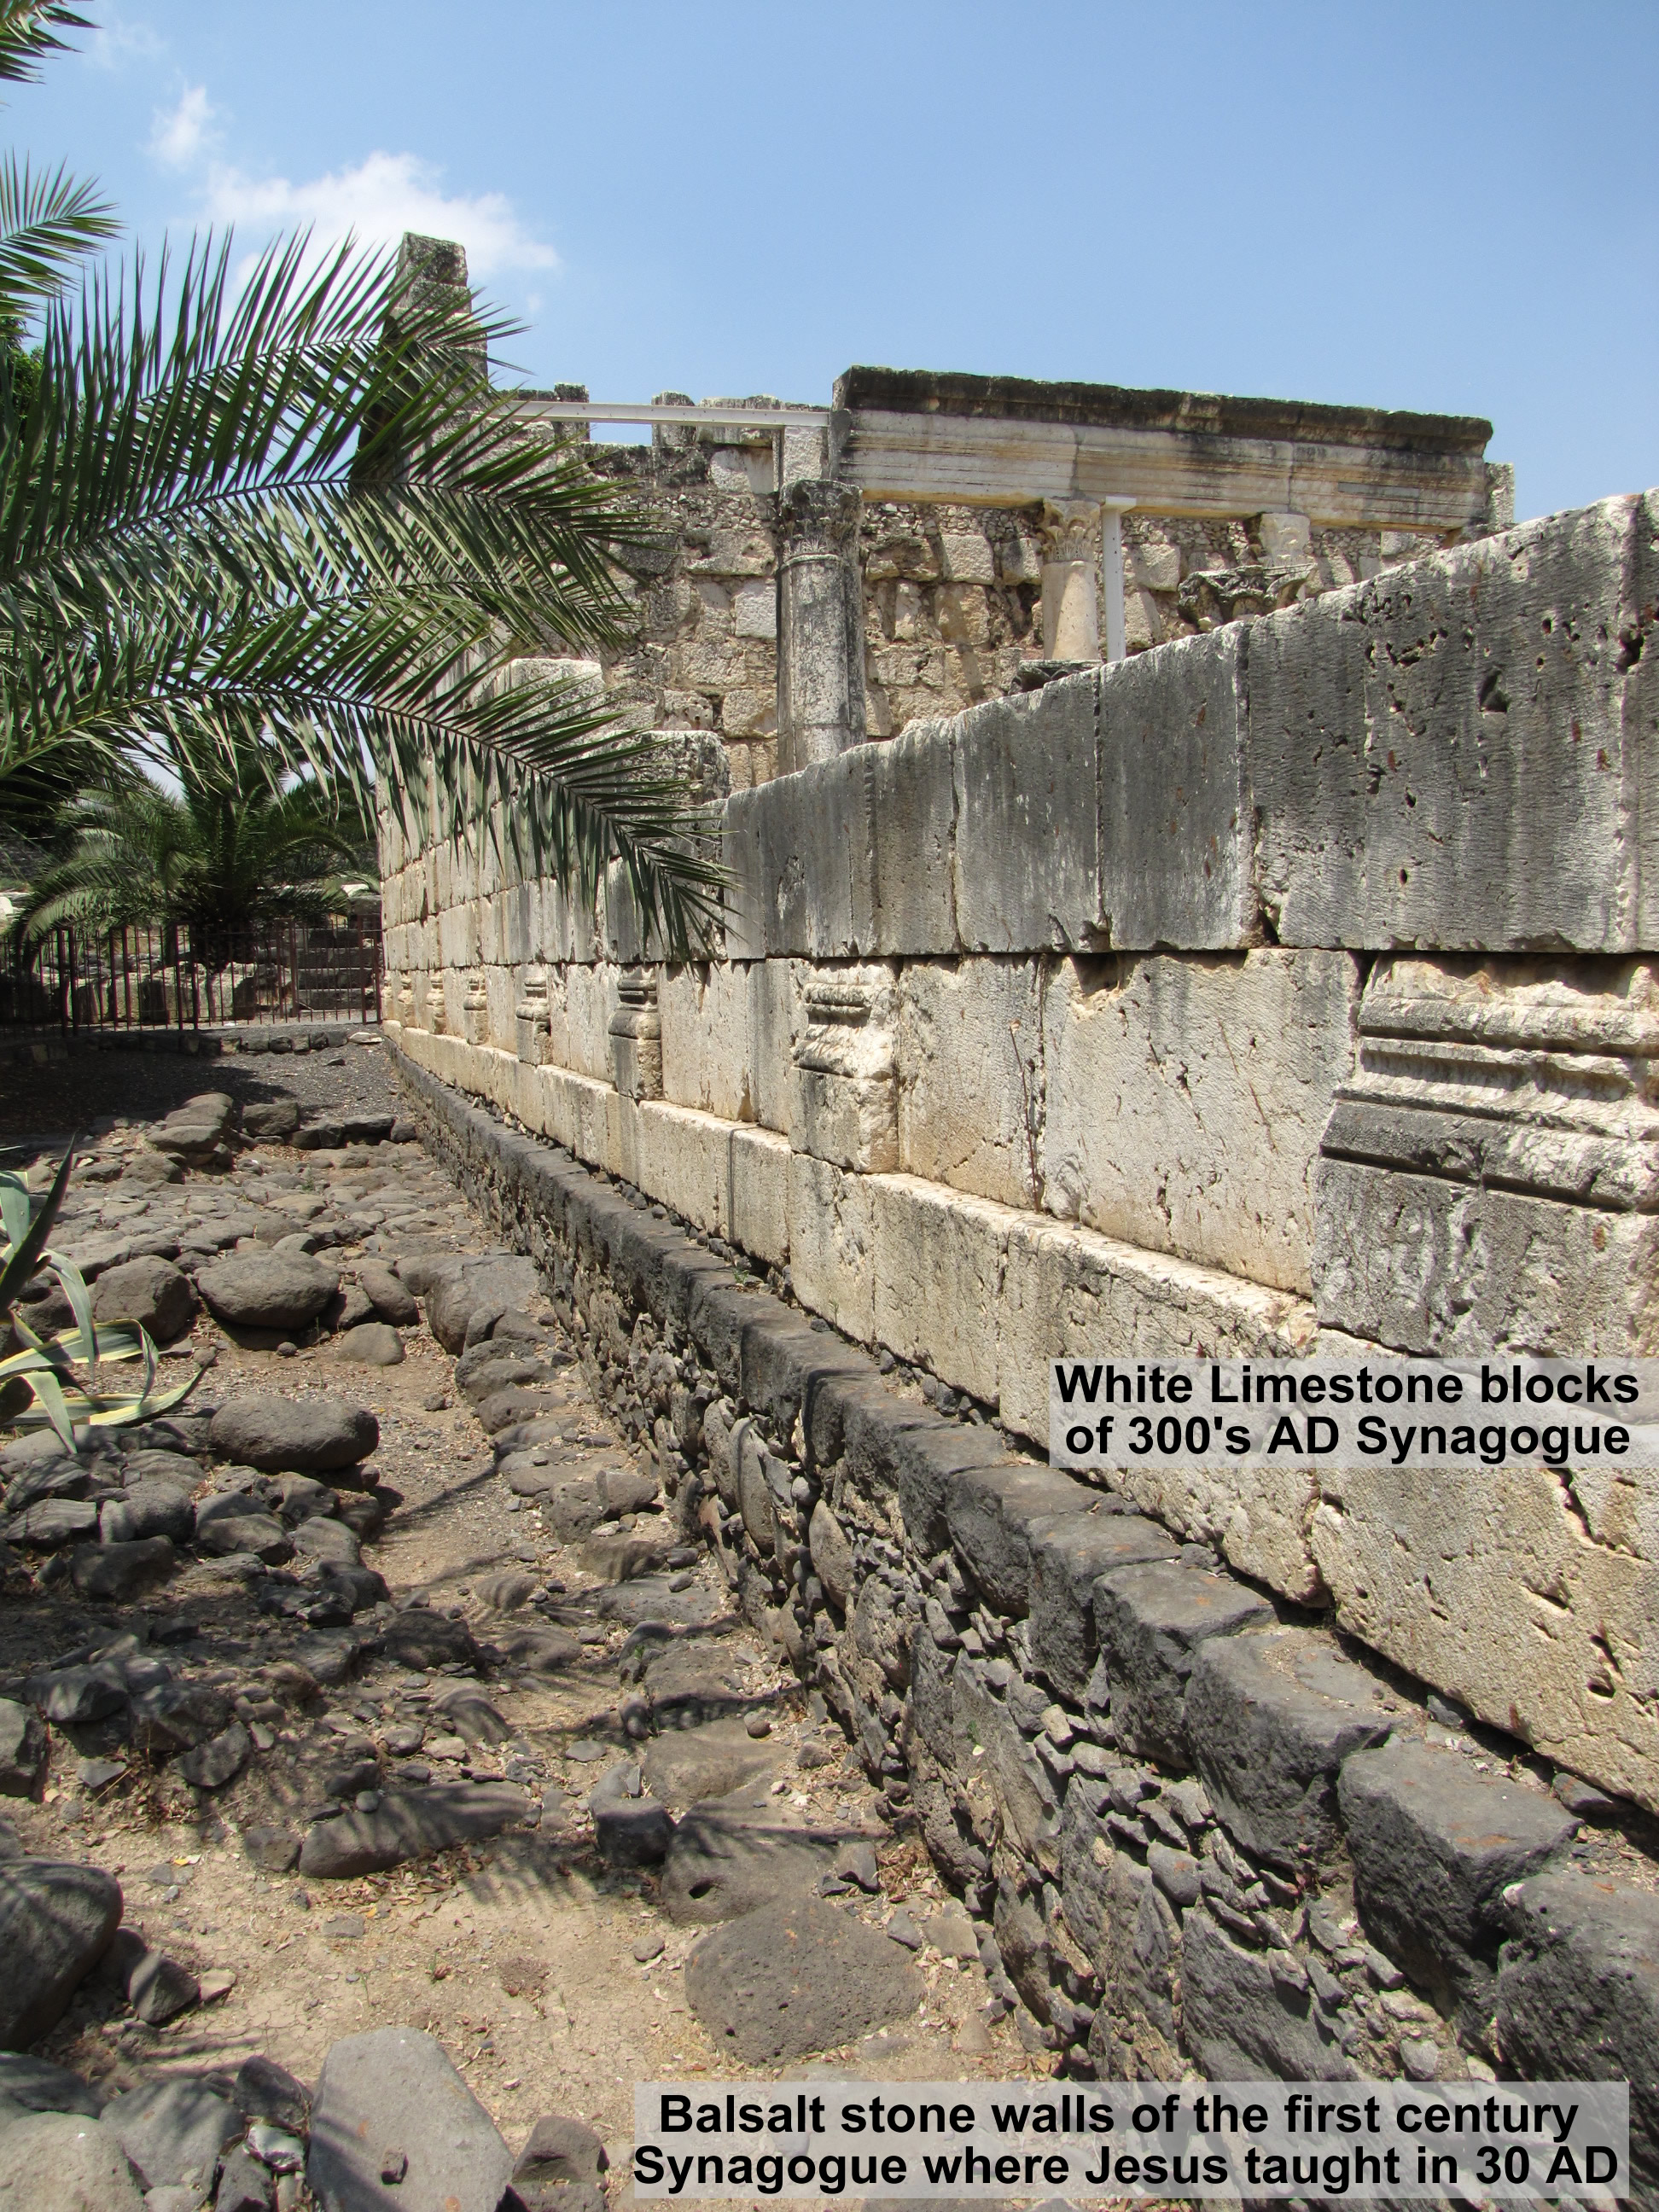 Capernaum Synagogue basalt and limestone walls from 30 AD and 300's AD